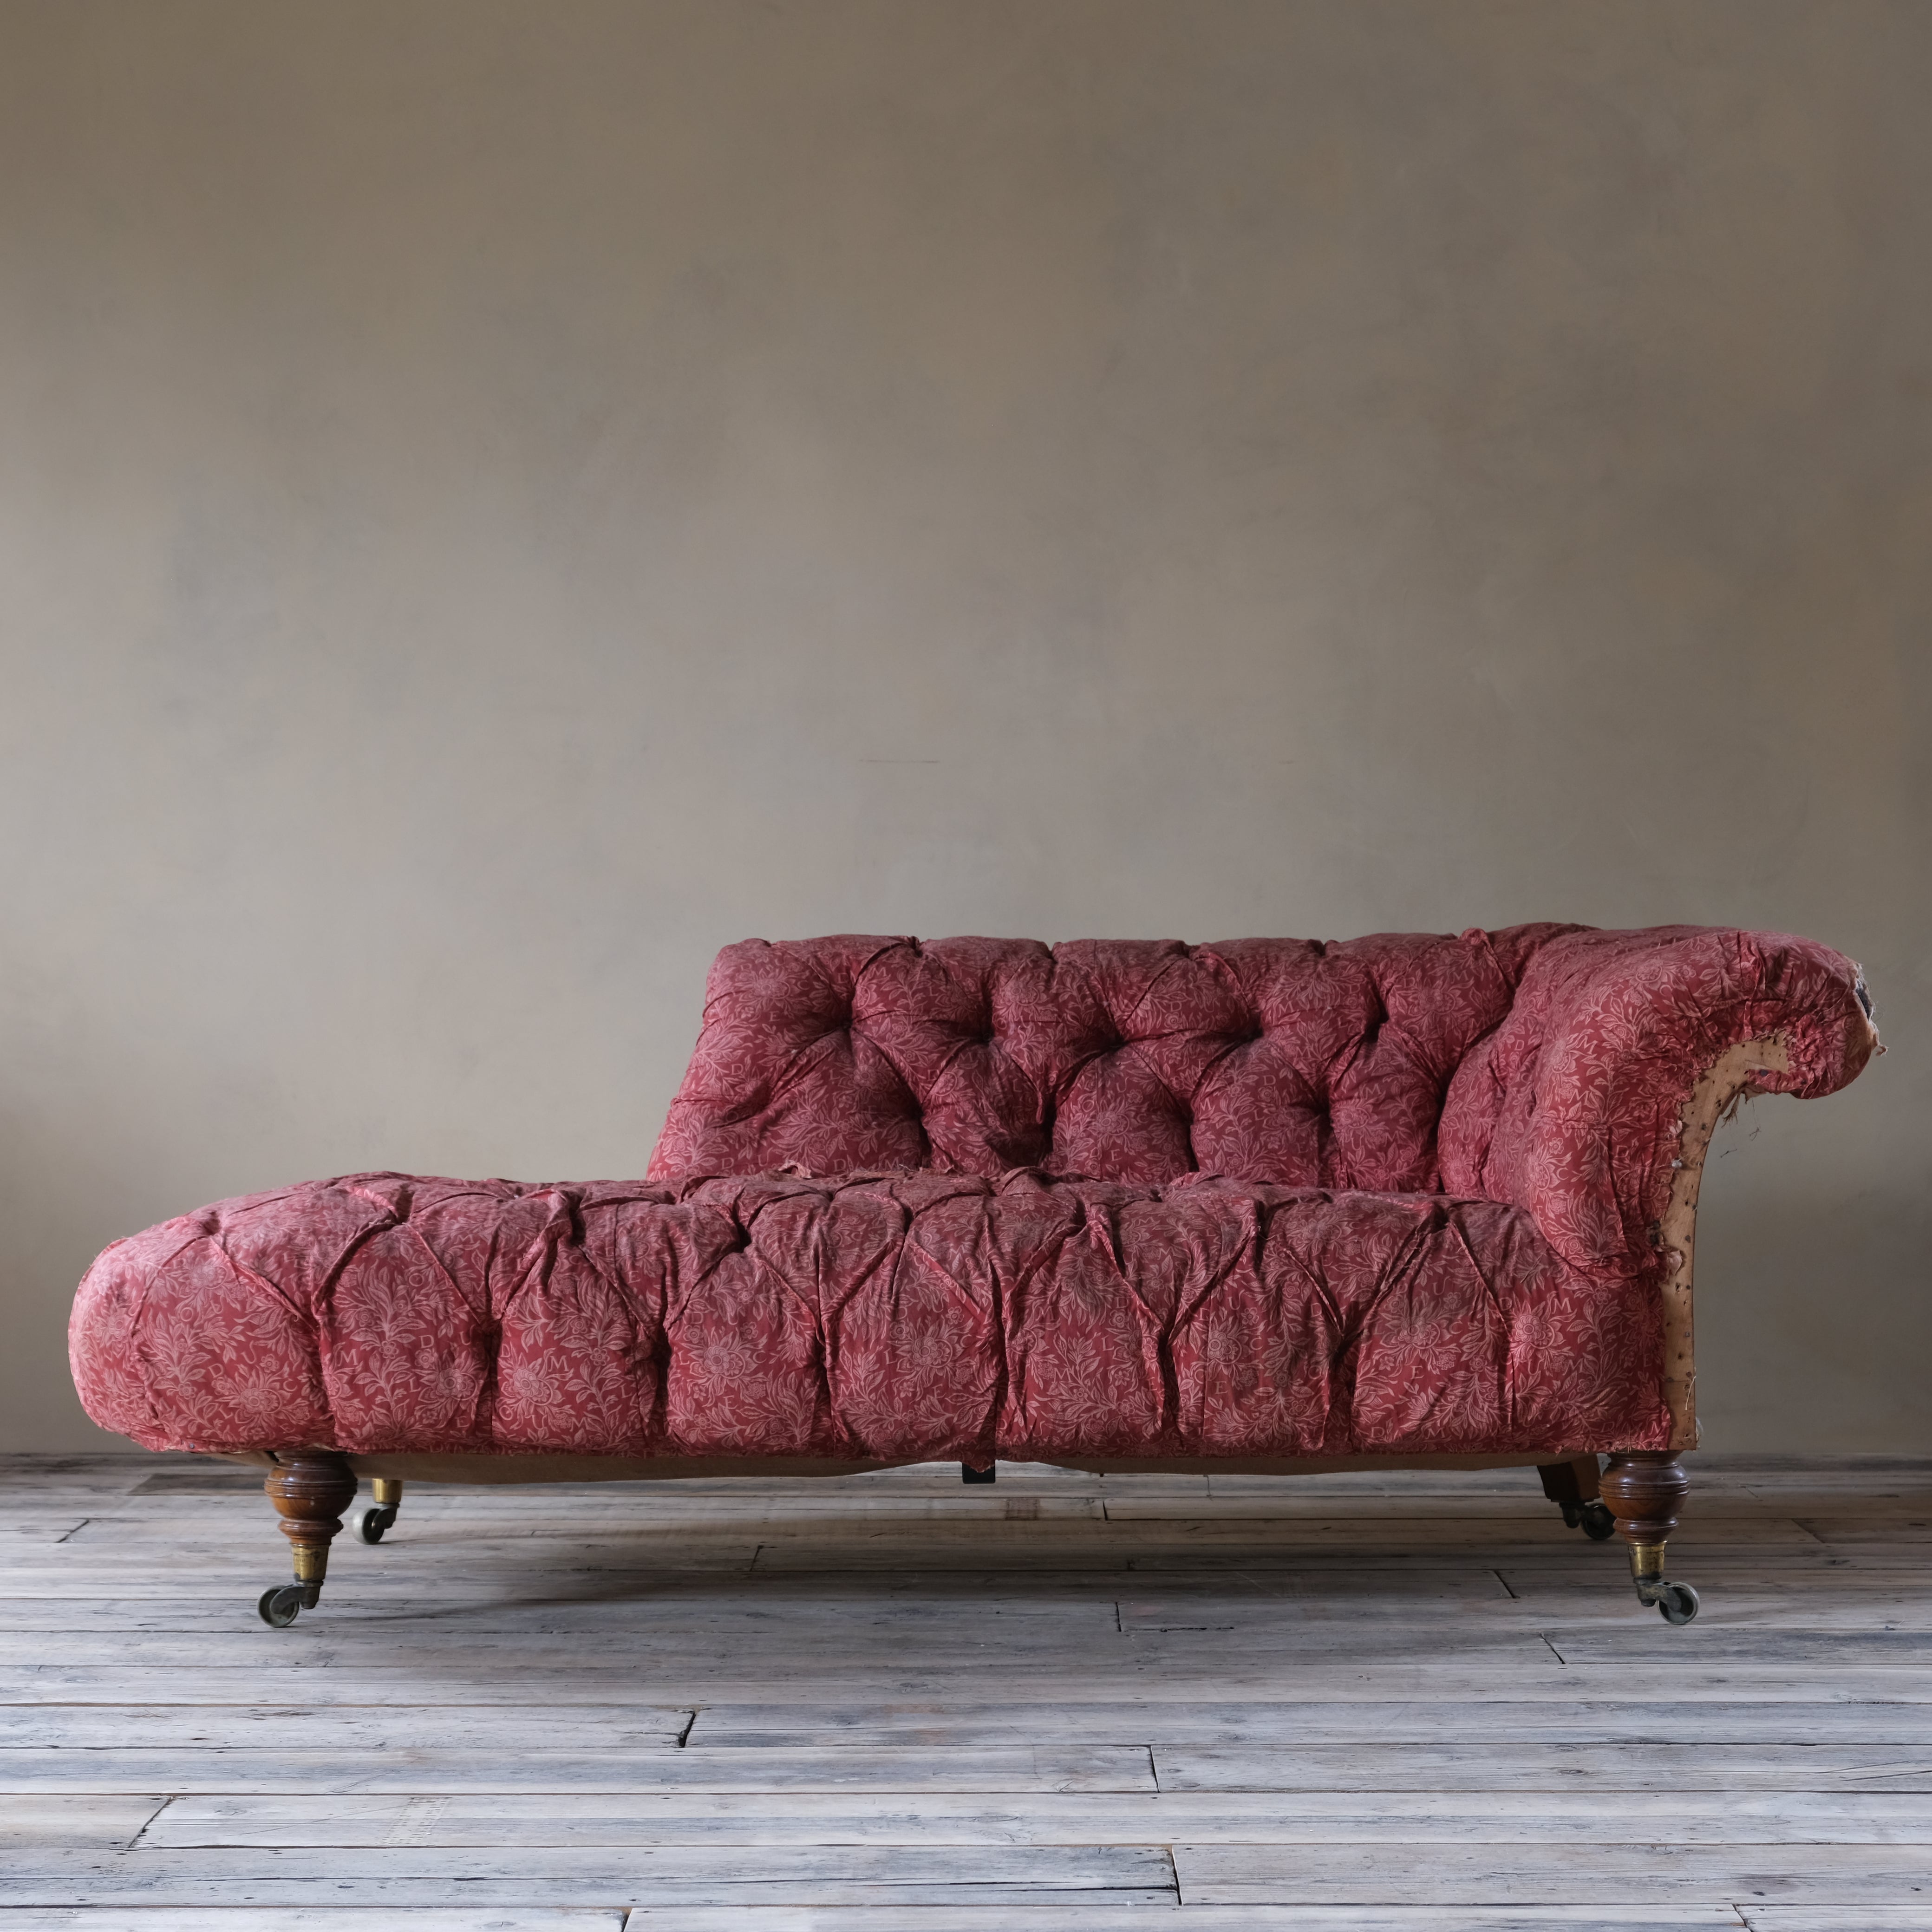 19th Century Howard & Sons Chesterfield Chaise Lounge